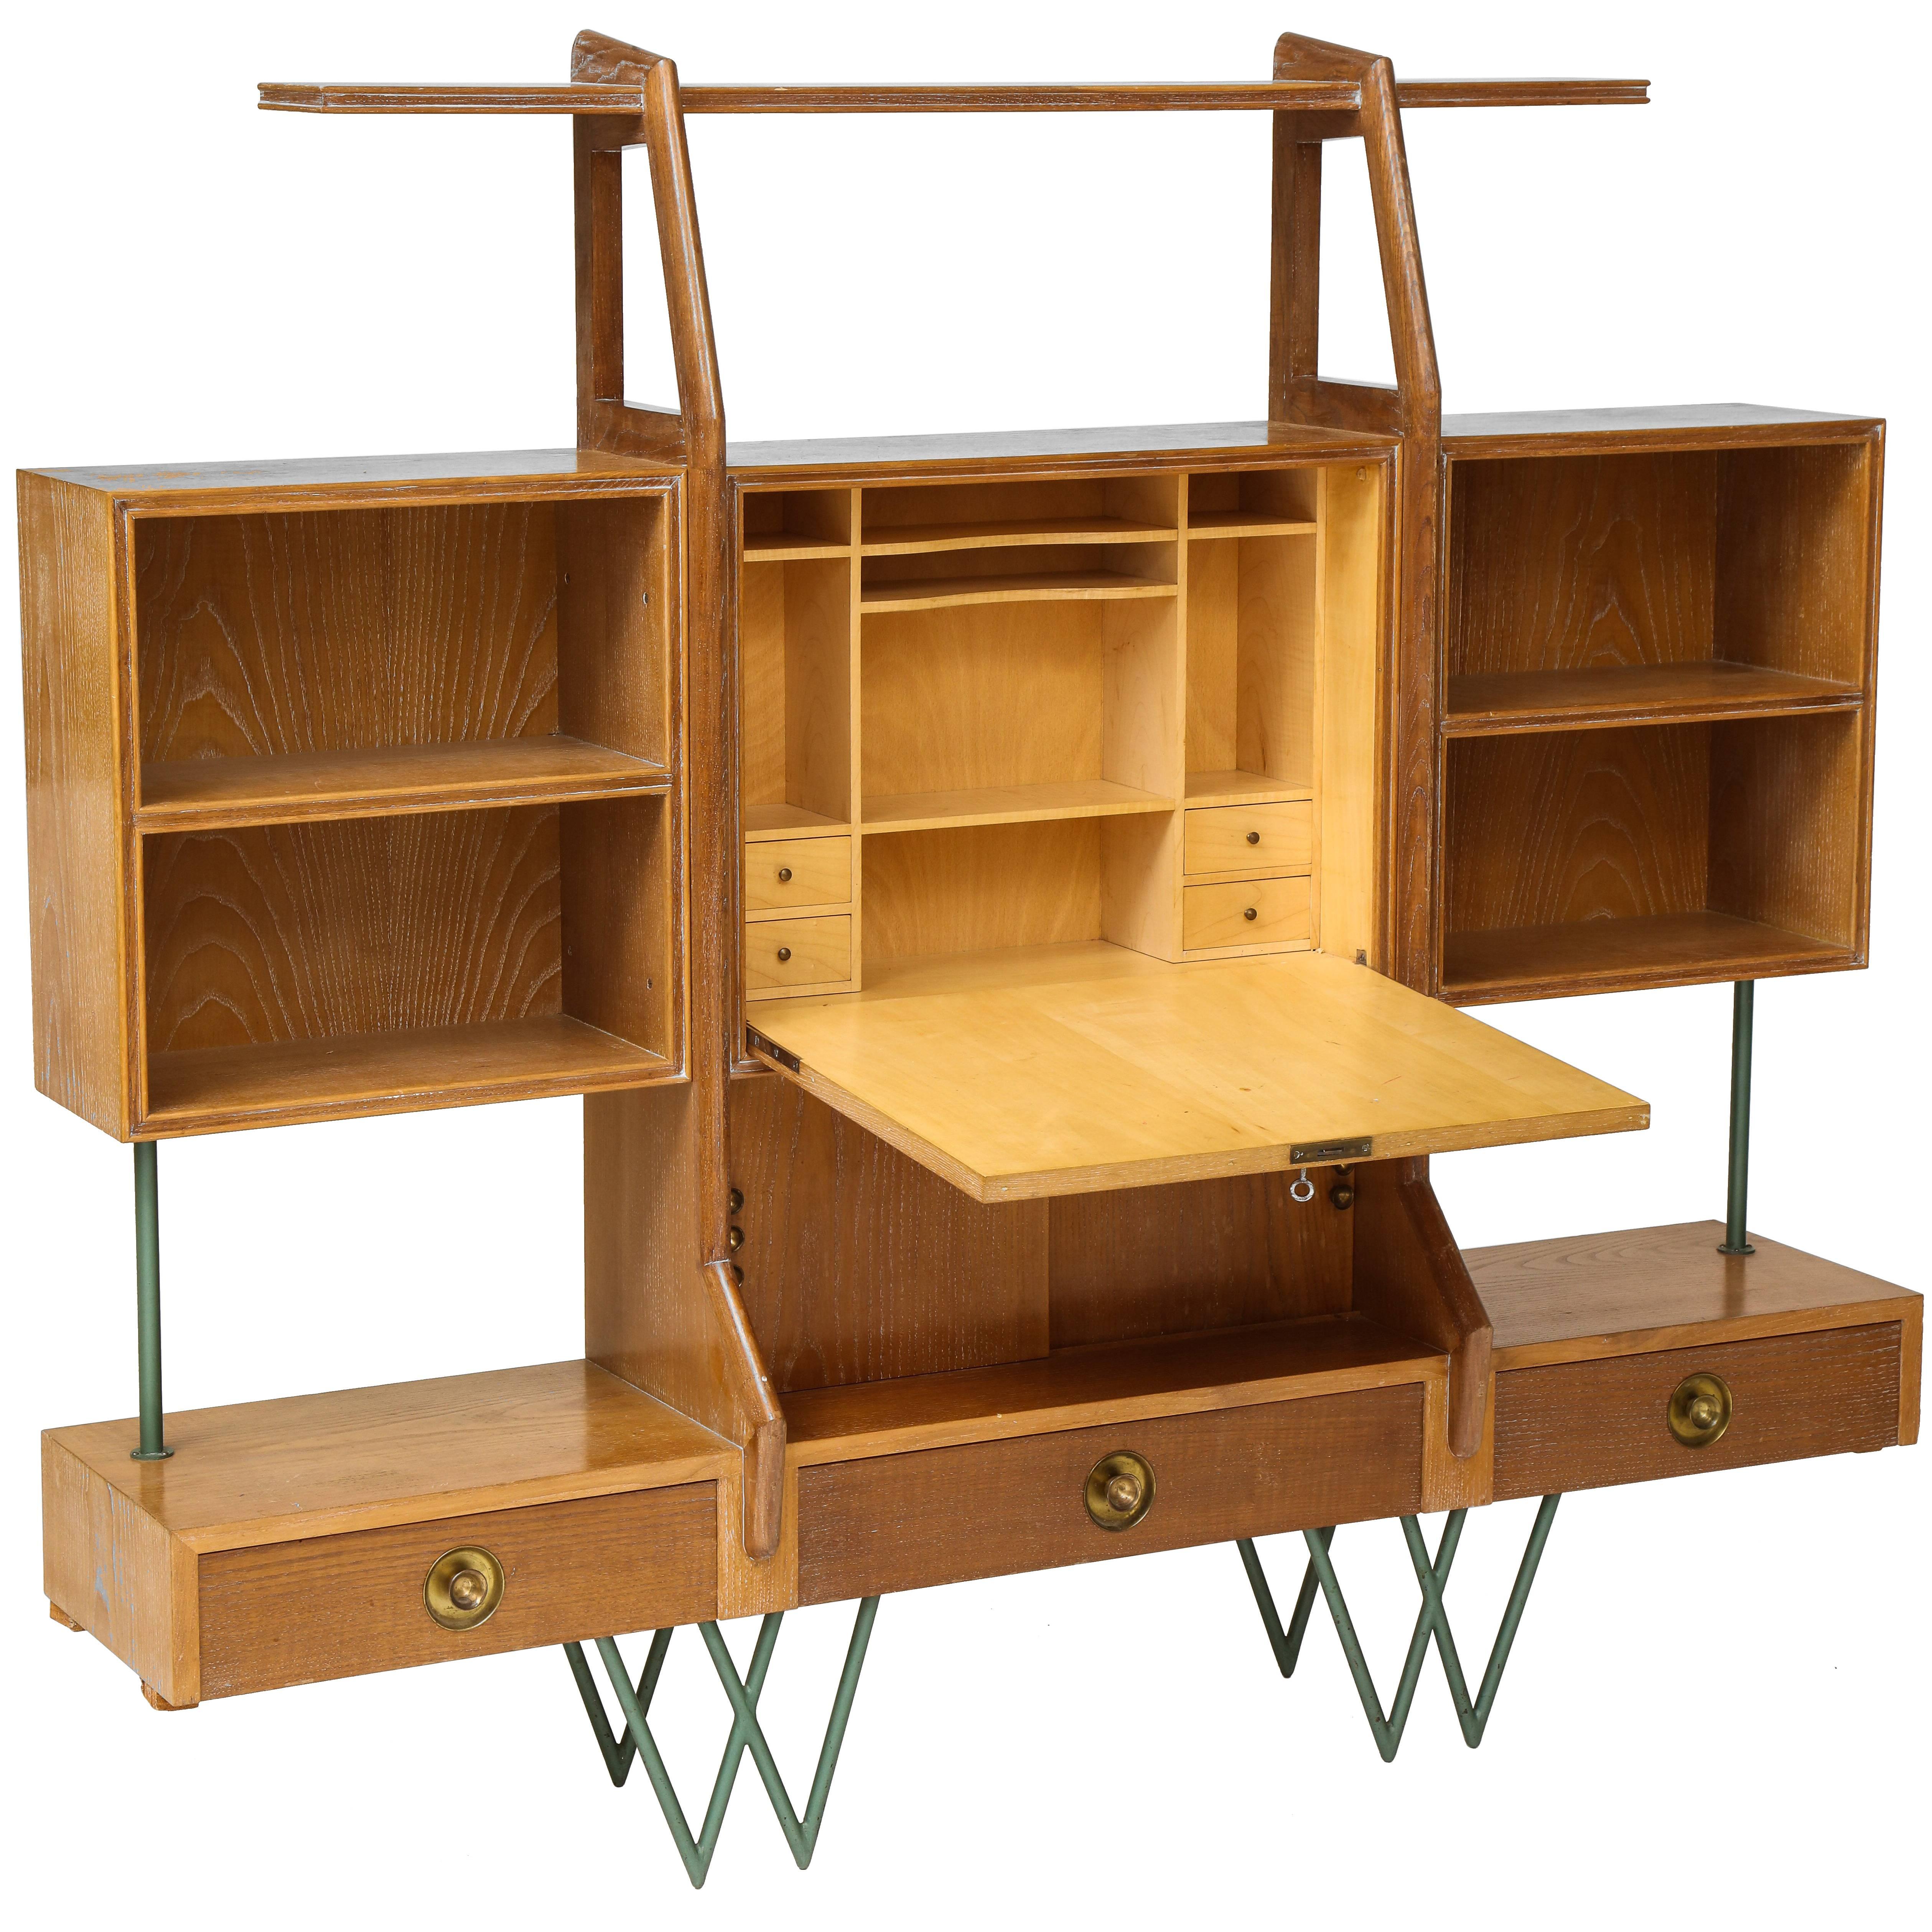 Architectural cerused oak bookshelf secretary Mid-Century, France with iron legs, 1950s.

Original bookshelf in cerused oak in excellent condition. Many details throughout. Many shelves and storage area. Iron V shaped legs. Bronze detail on all